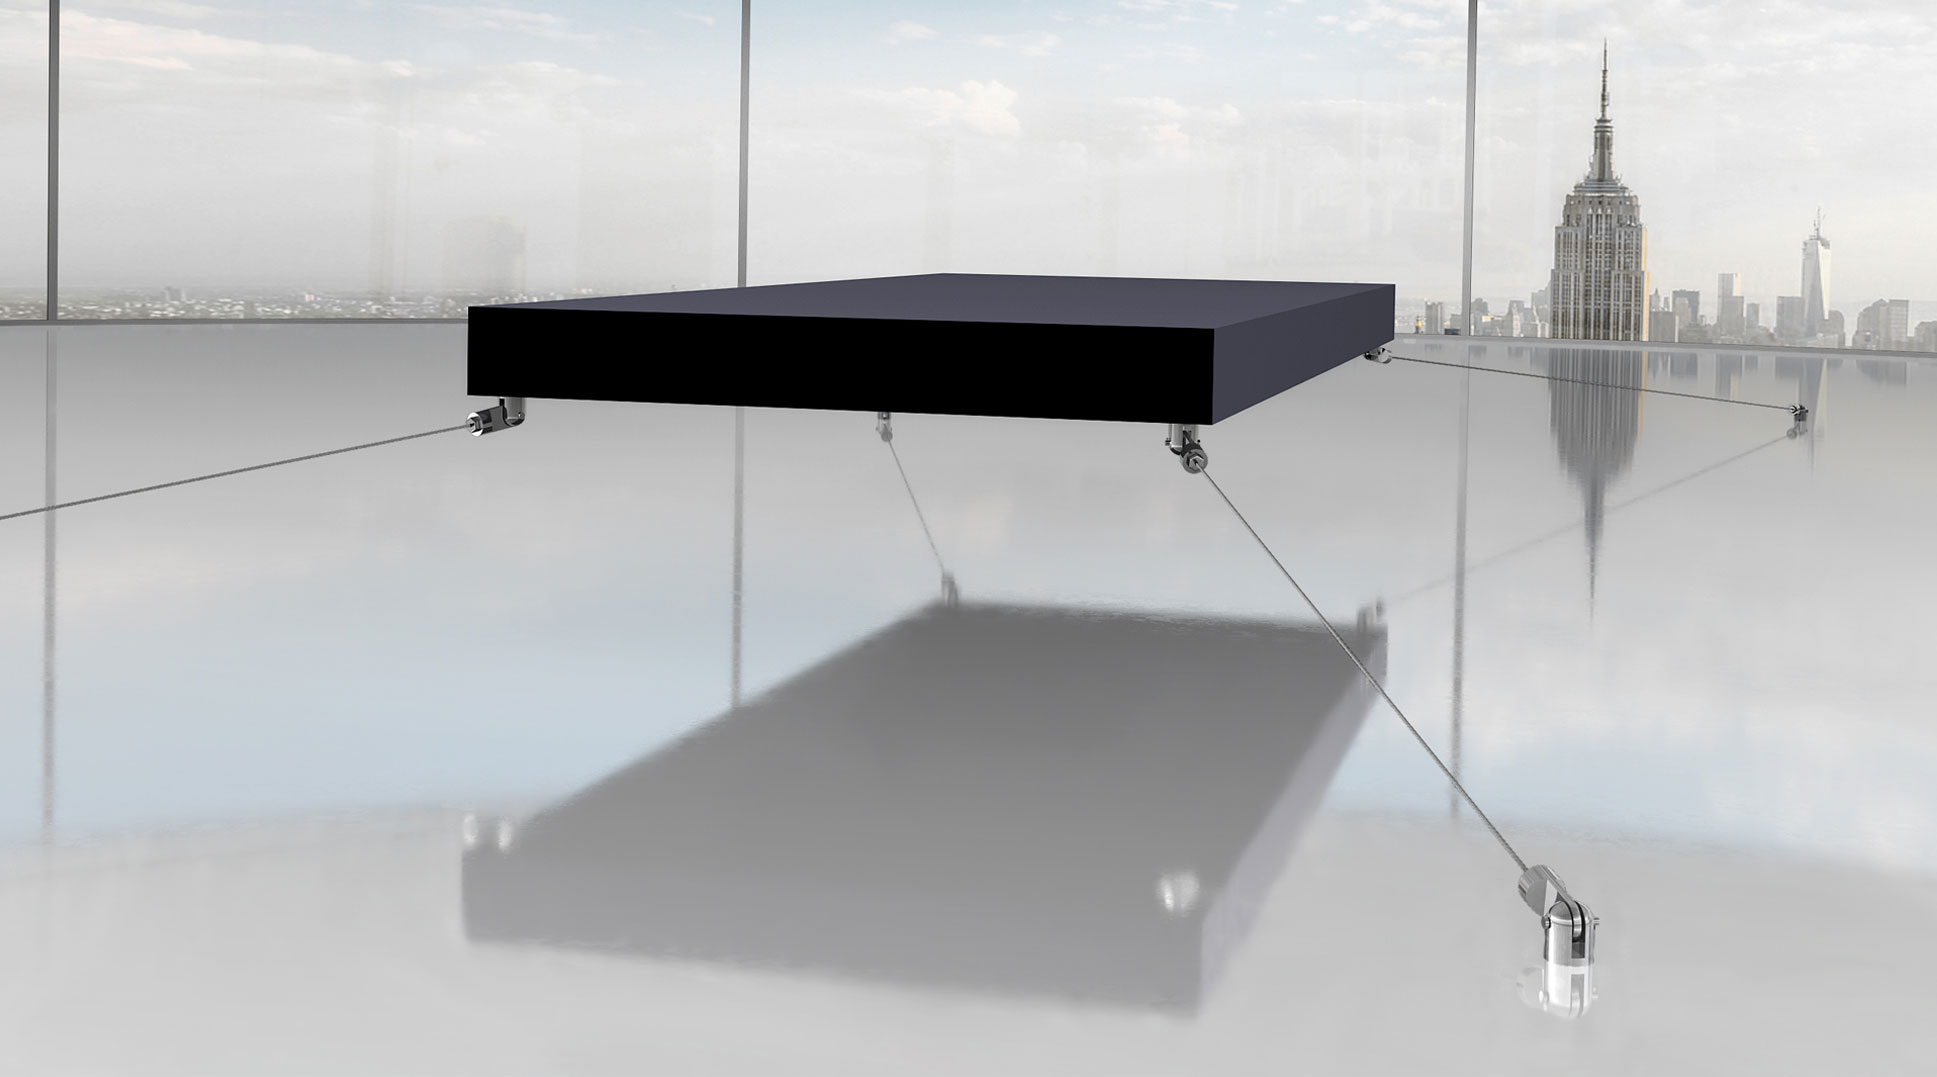 Magnetic Floating Bed | Photo from dornob.com | https://dornob.com/wp-content/uploads/2010/09/floating-bed.jpg